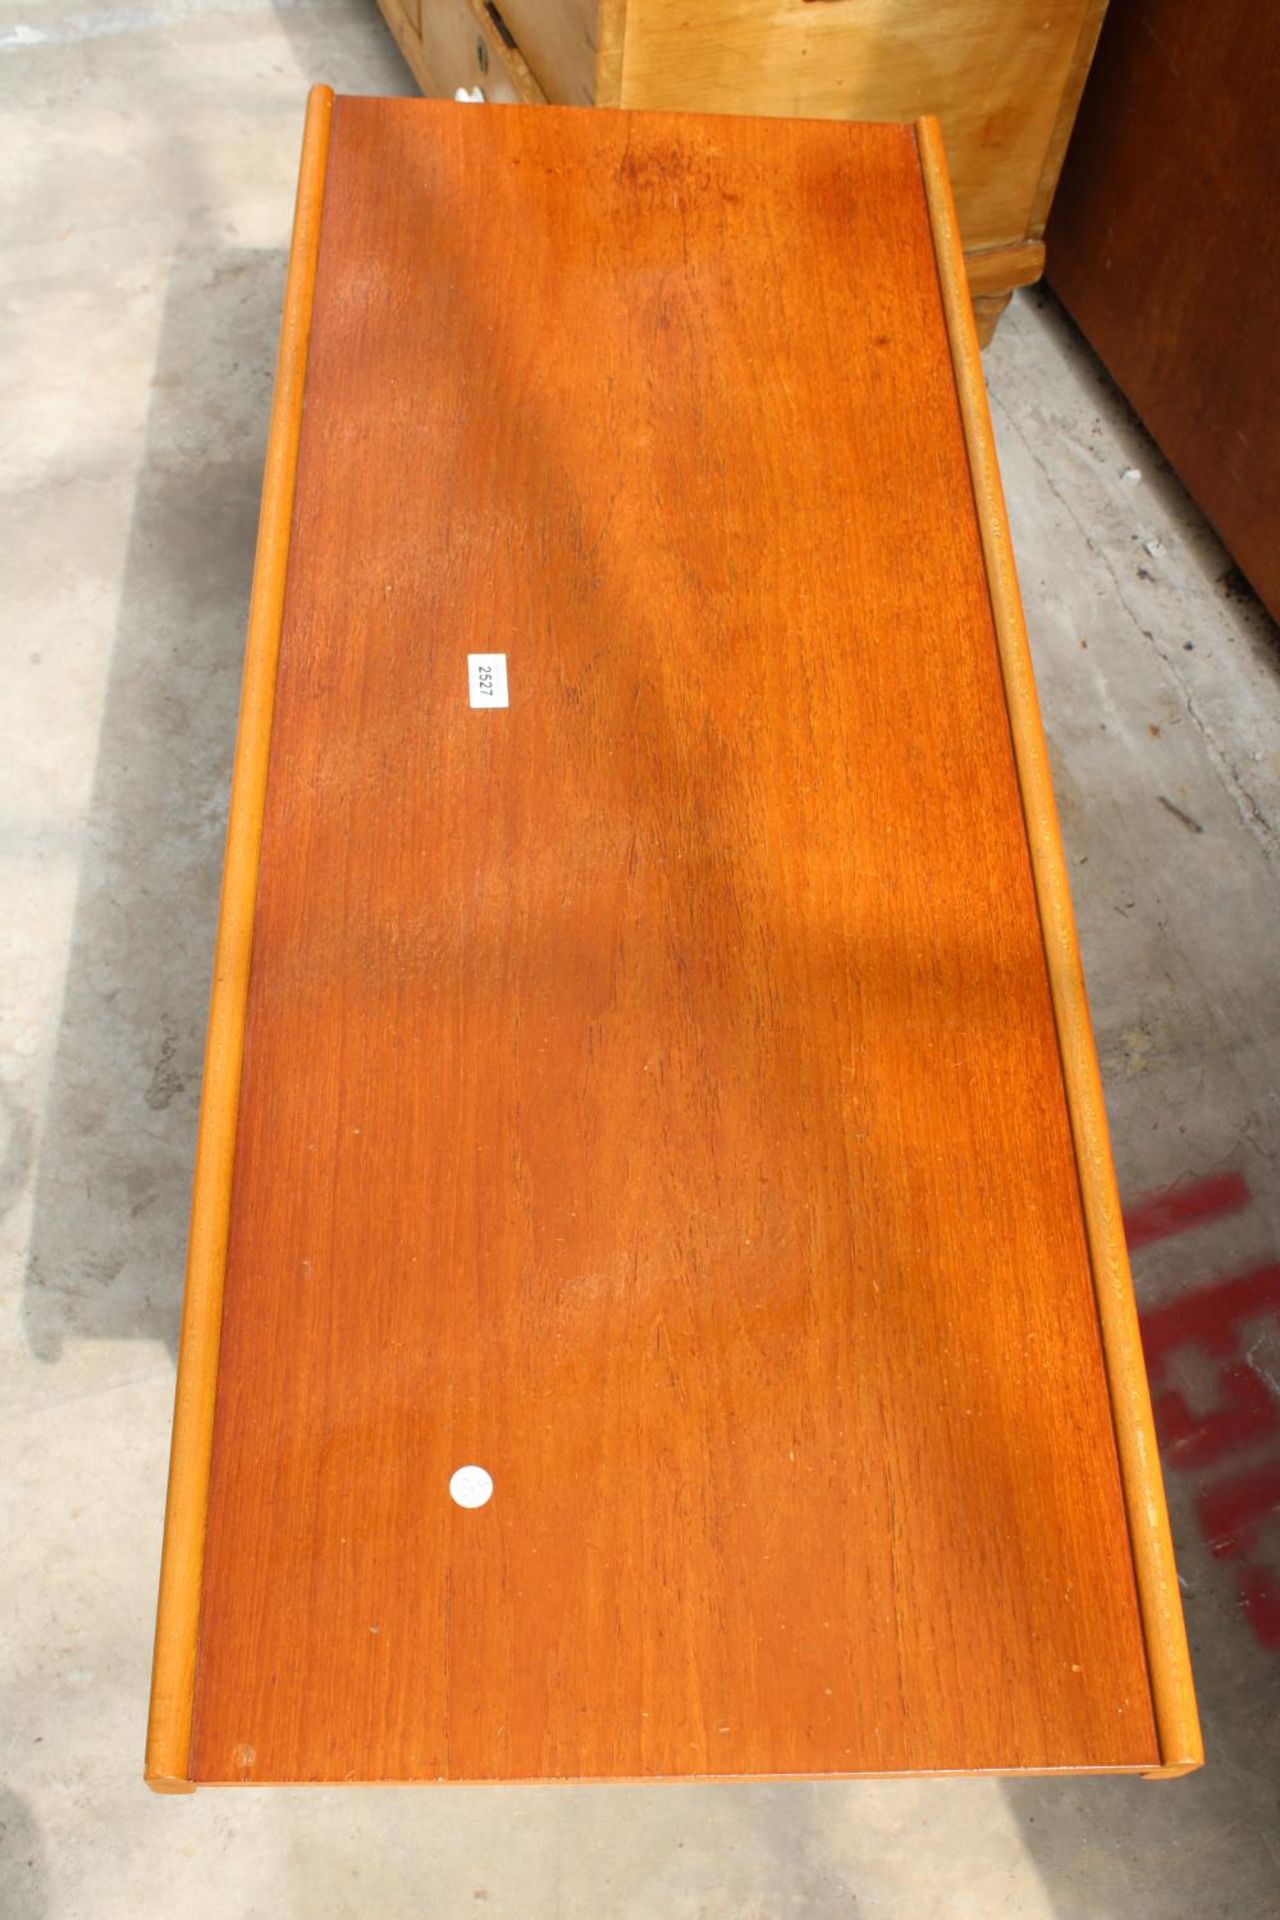 A RETRO TEAK 2 TIER COFFEE TABLE, WITH SLATTED BASE 44" X 18" - Image 3 of 3